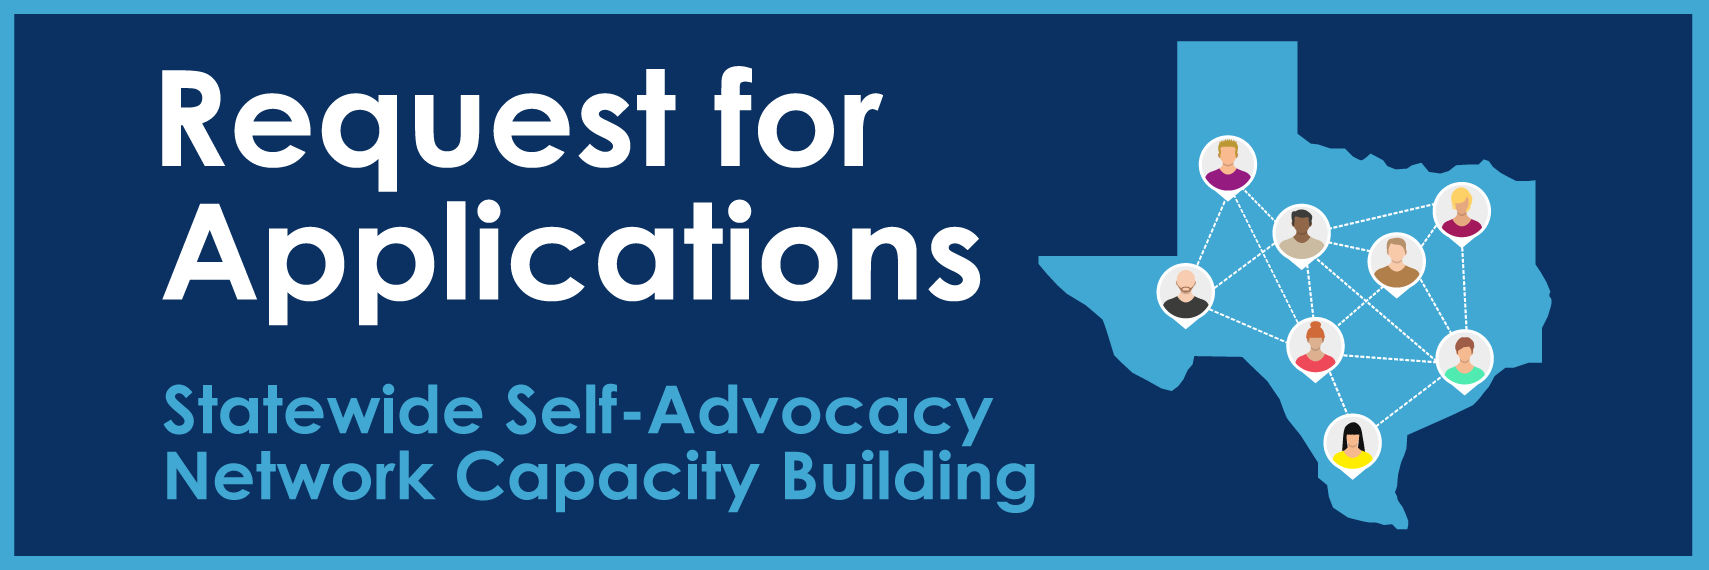 RFA Statewide Self Advocacy Network Capacity Building Graphic